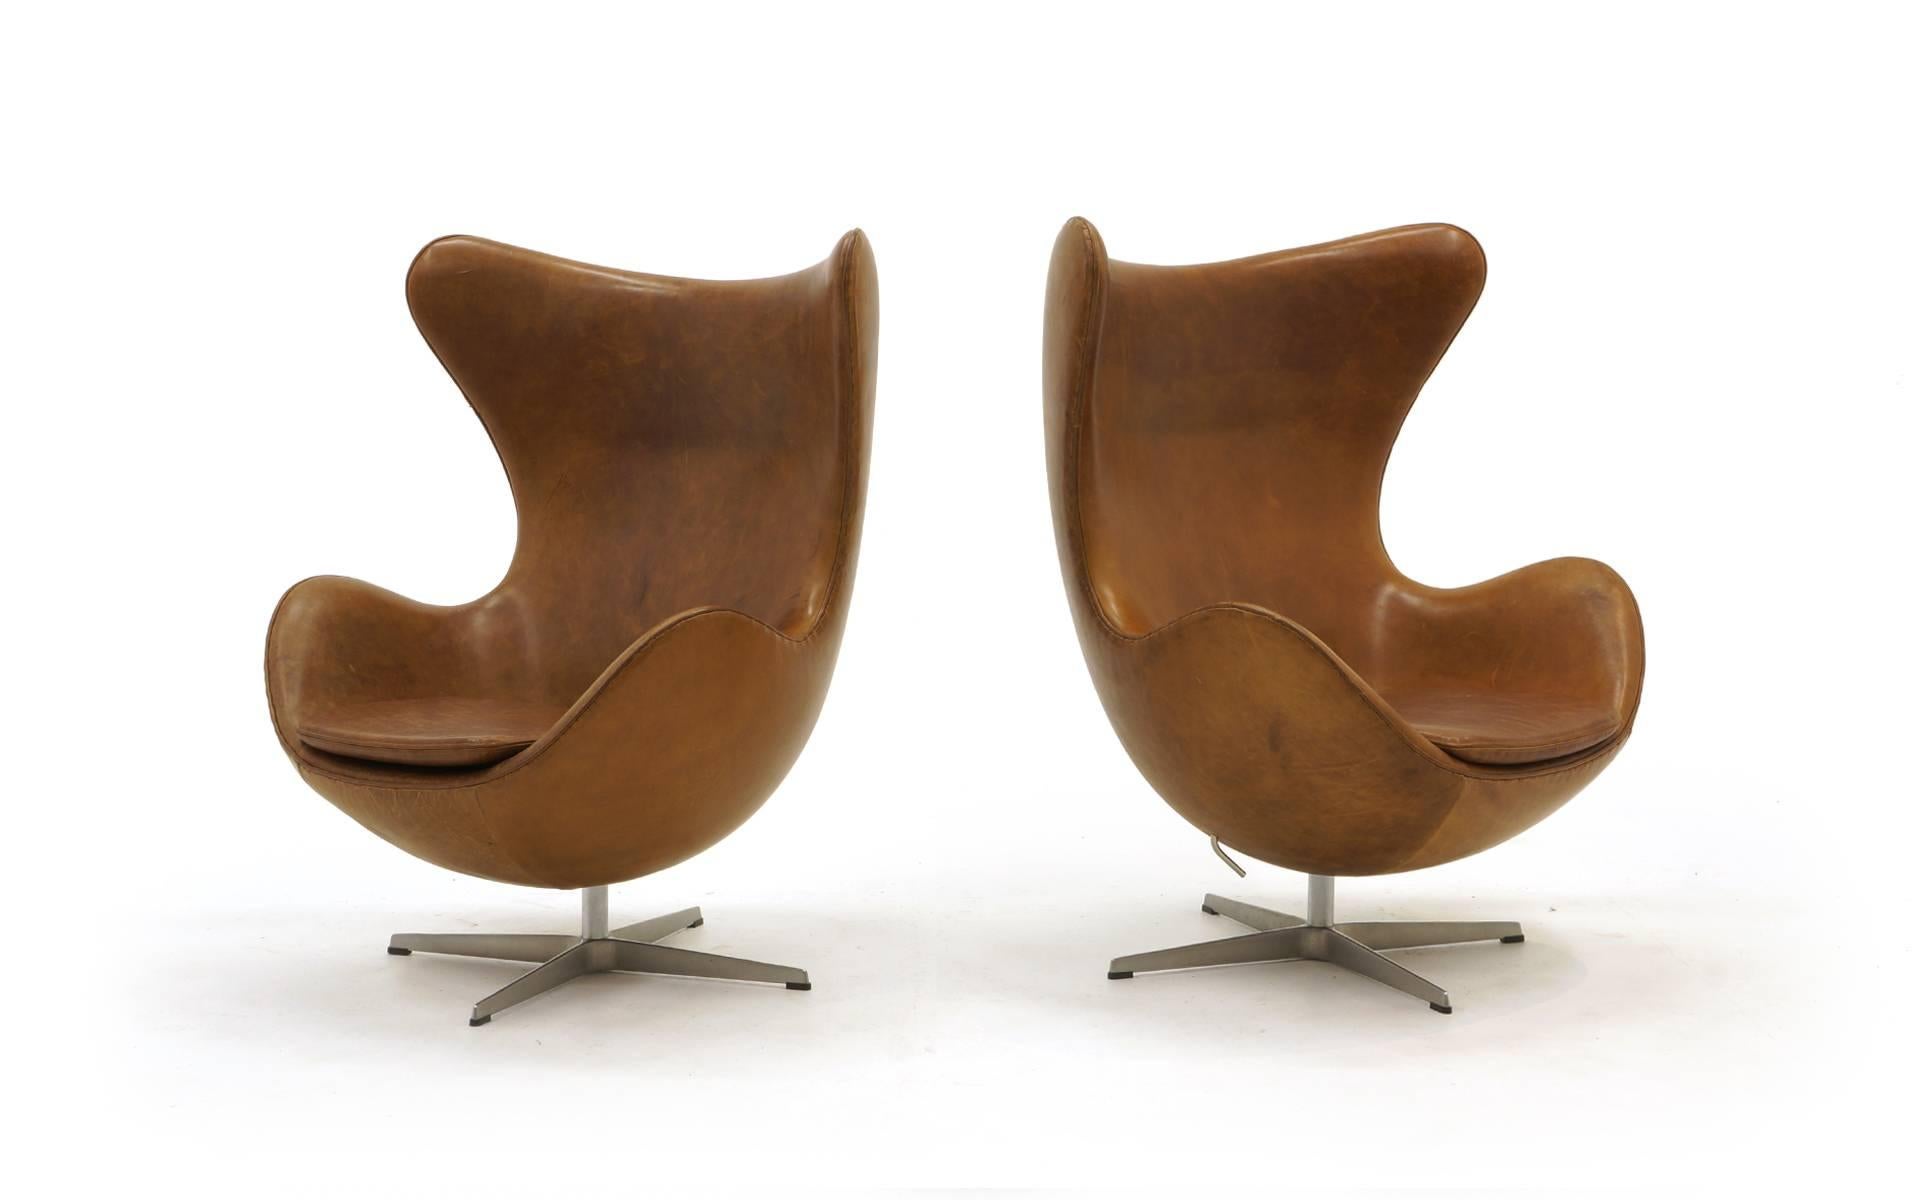 Original pair of Egg chairs designed by Arne Jacobsen. Expertly reupholstered in Moore and Giles Brentwood Cuervo leather. The inherent characteristics of this expensive leather is that it will show distress. The color fluctuations are natural to